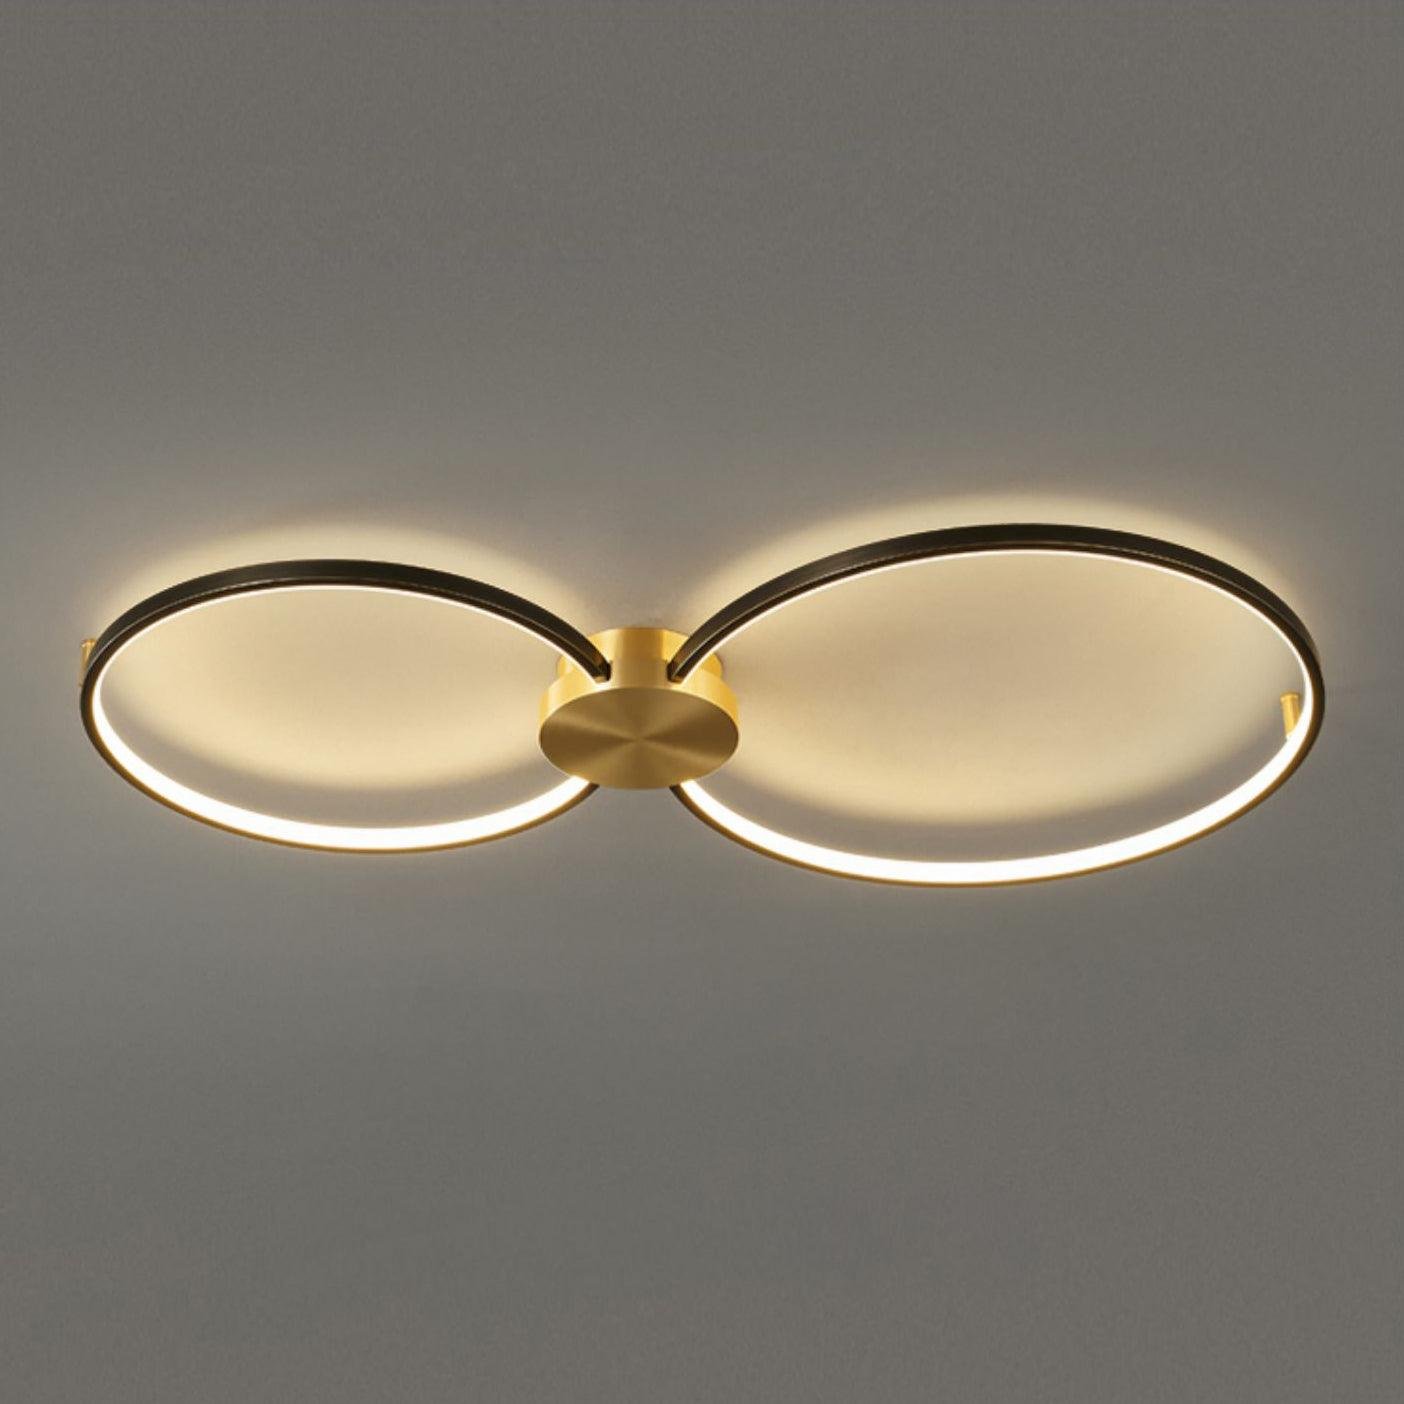 Black Loop LED Ceiling Light with Two Laps, Dimensions: L 35.4″ x W 19.7″ x H 2.4″ or L 90cm x W 50cm x H 6cm, Three-color Changing Light